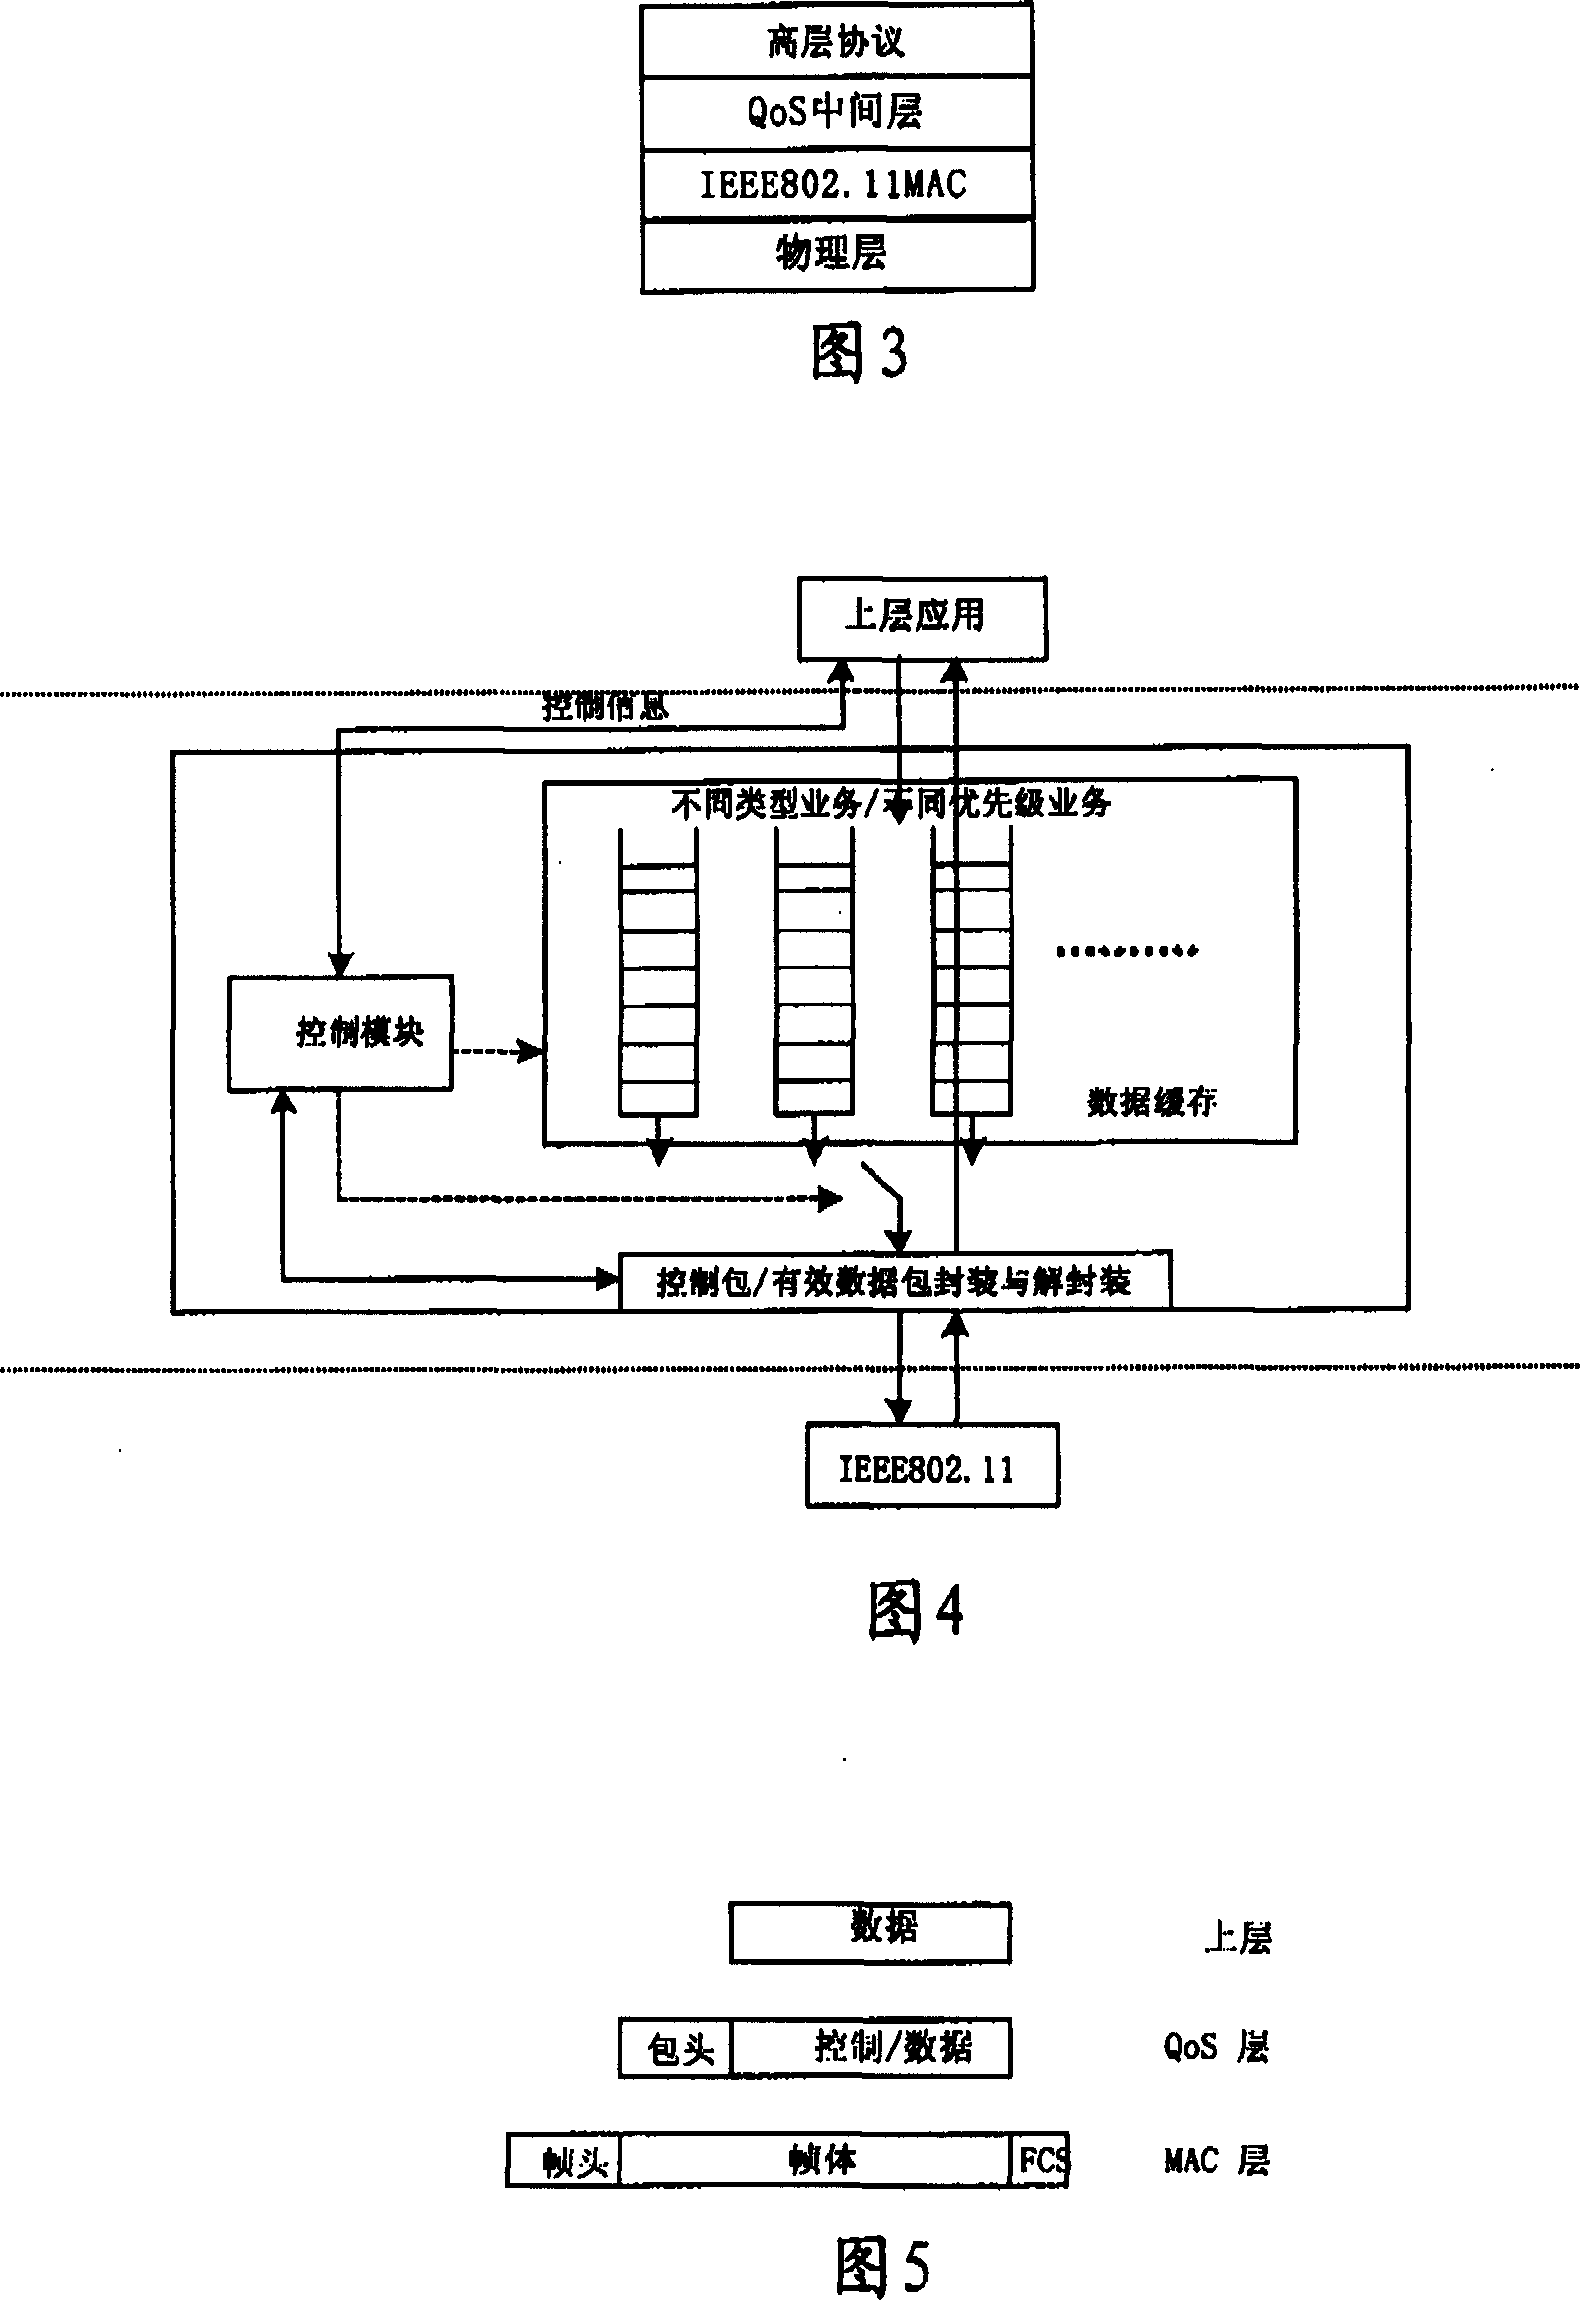 Method and device for realizing WLAN real-time and QoS